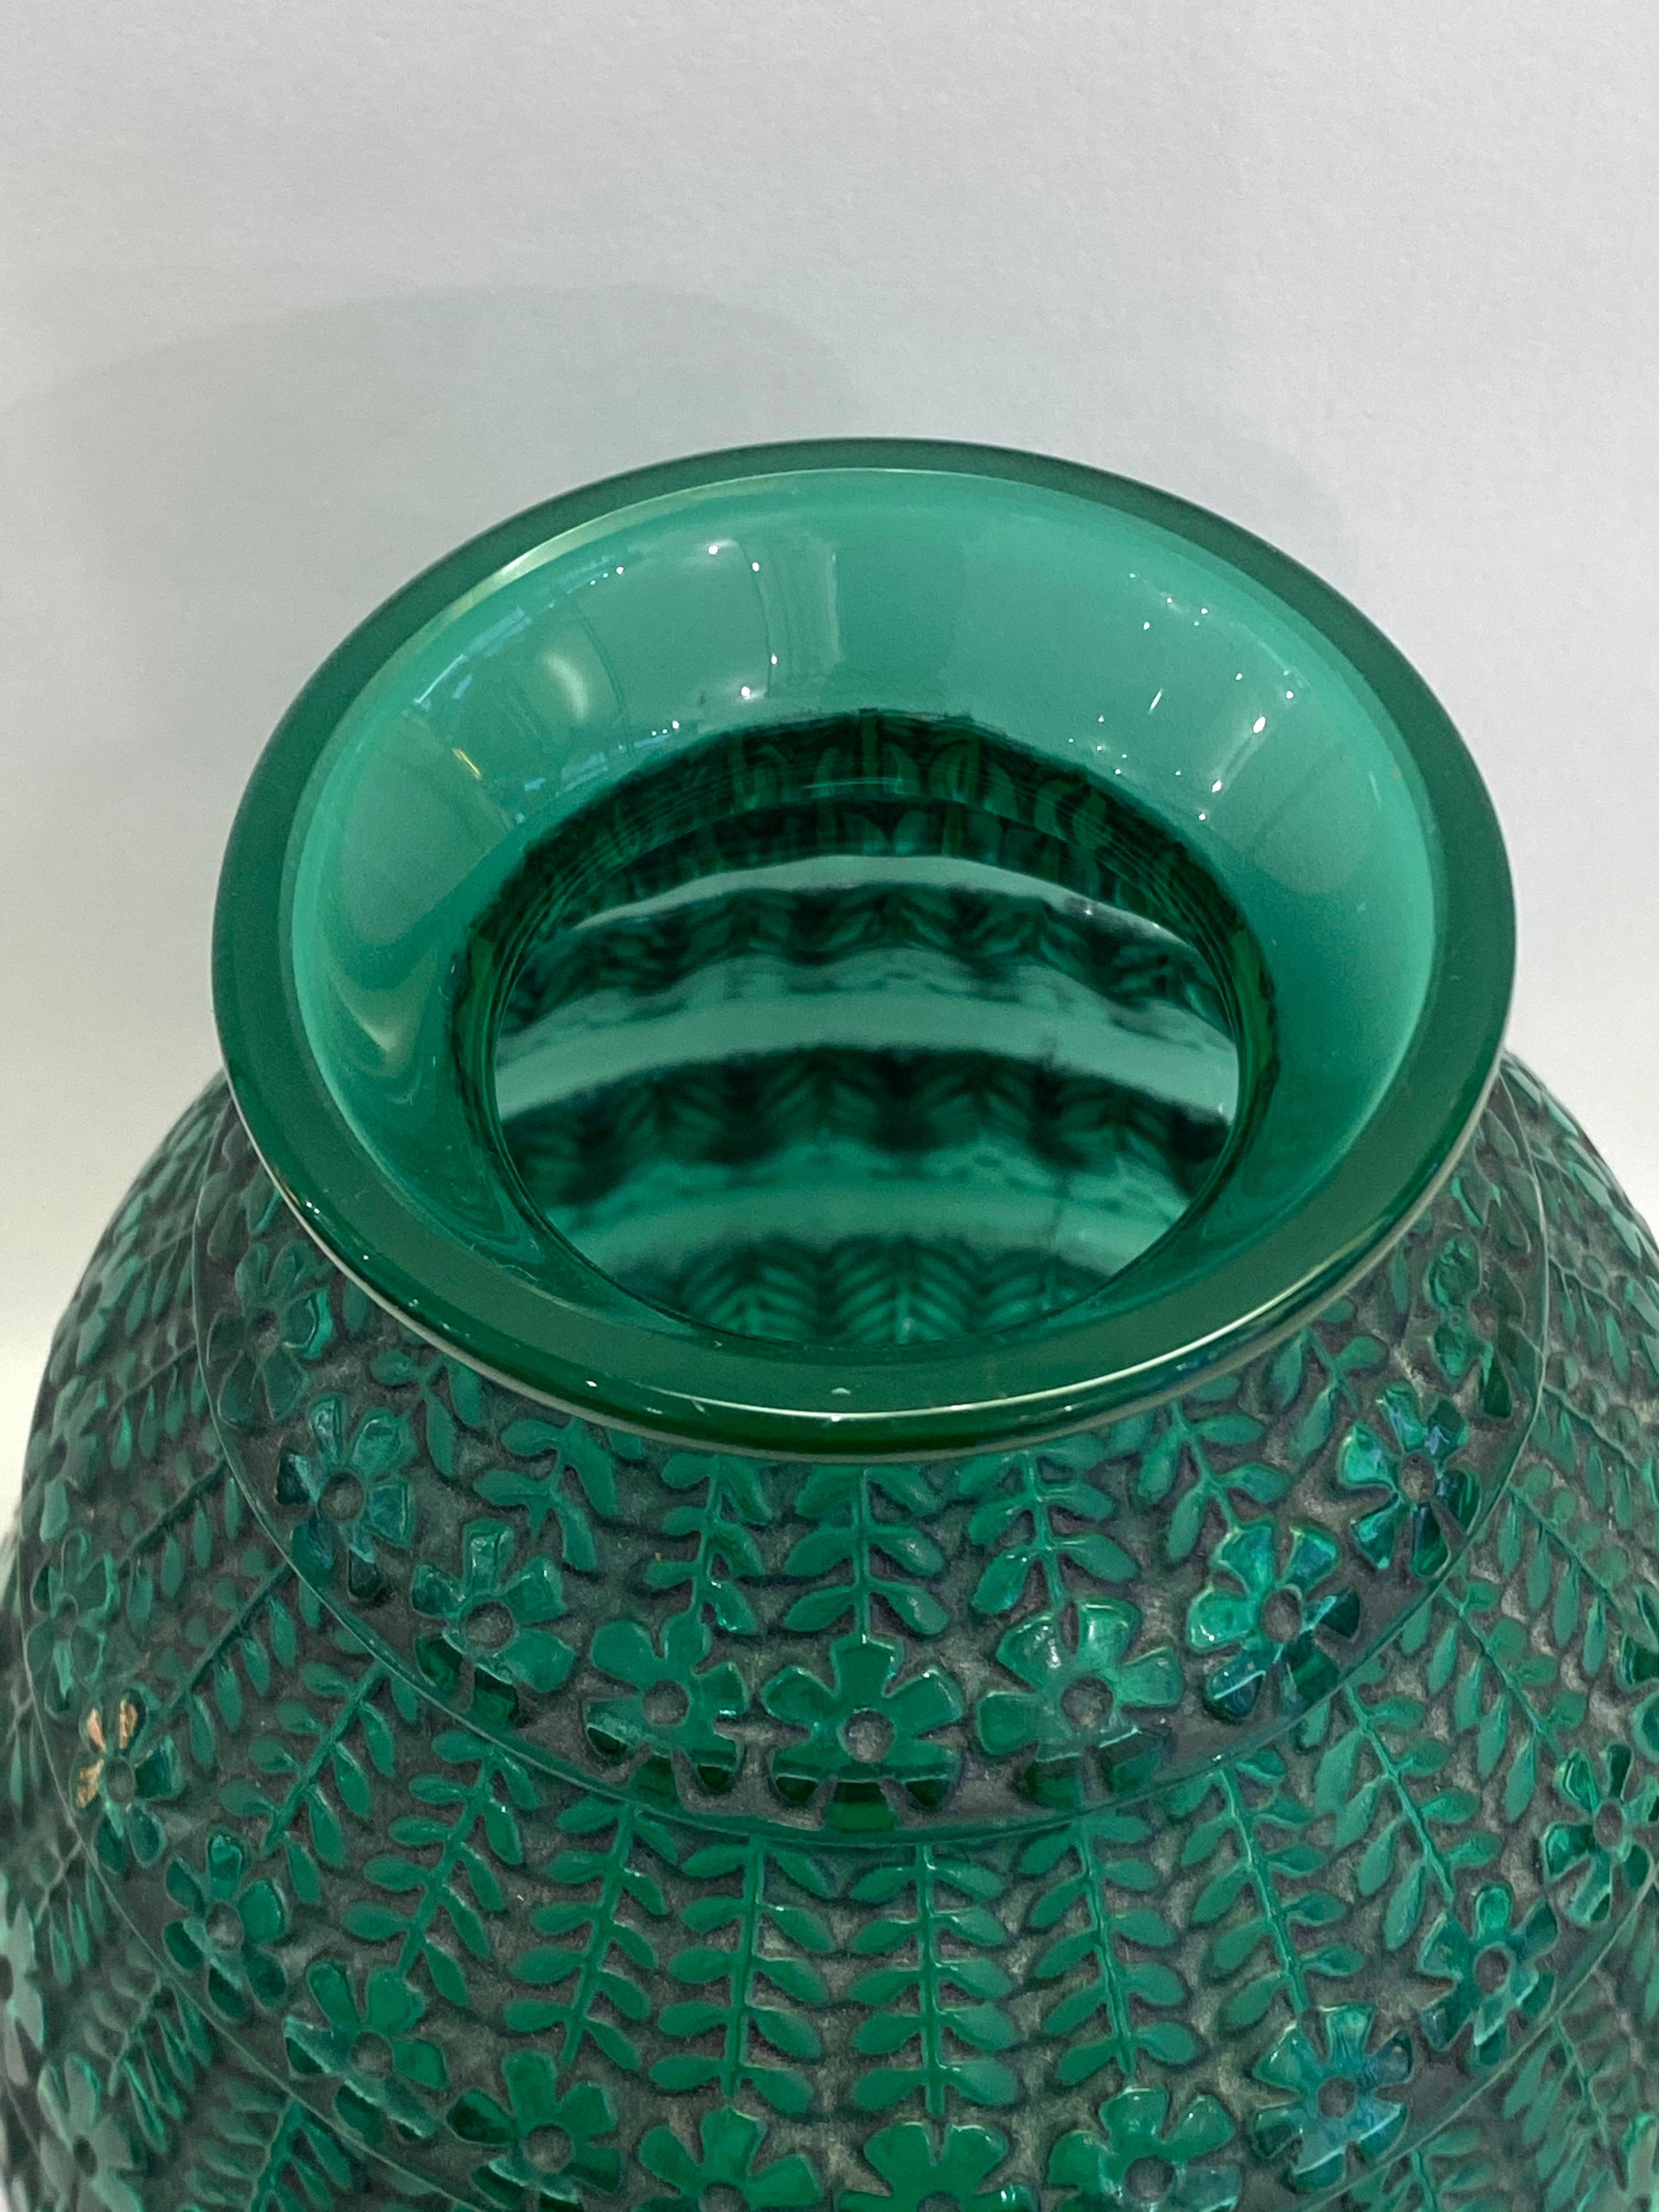 French 1929 René Lalique Ferrieres Vase in Emerald Green Glass with Black Patina